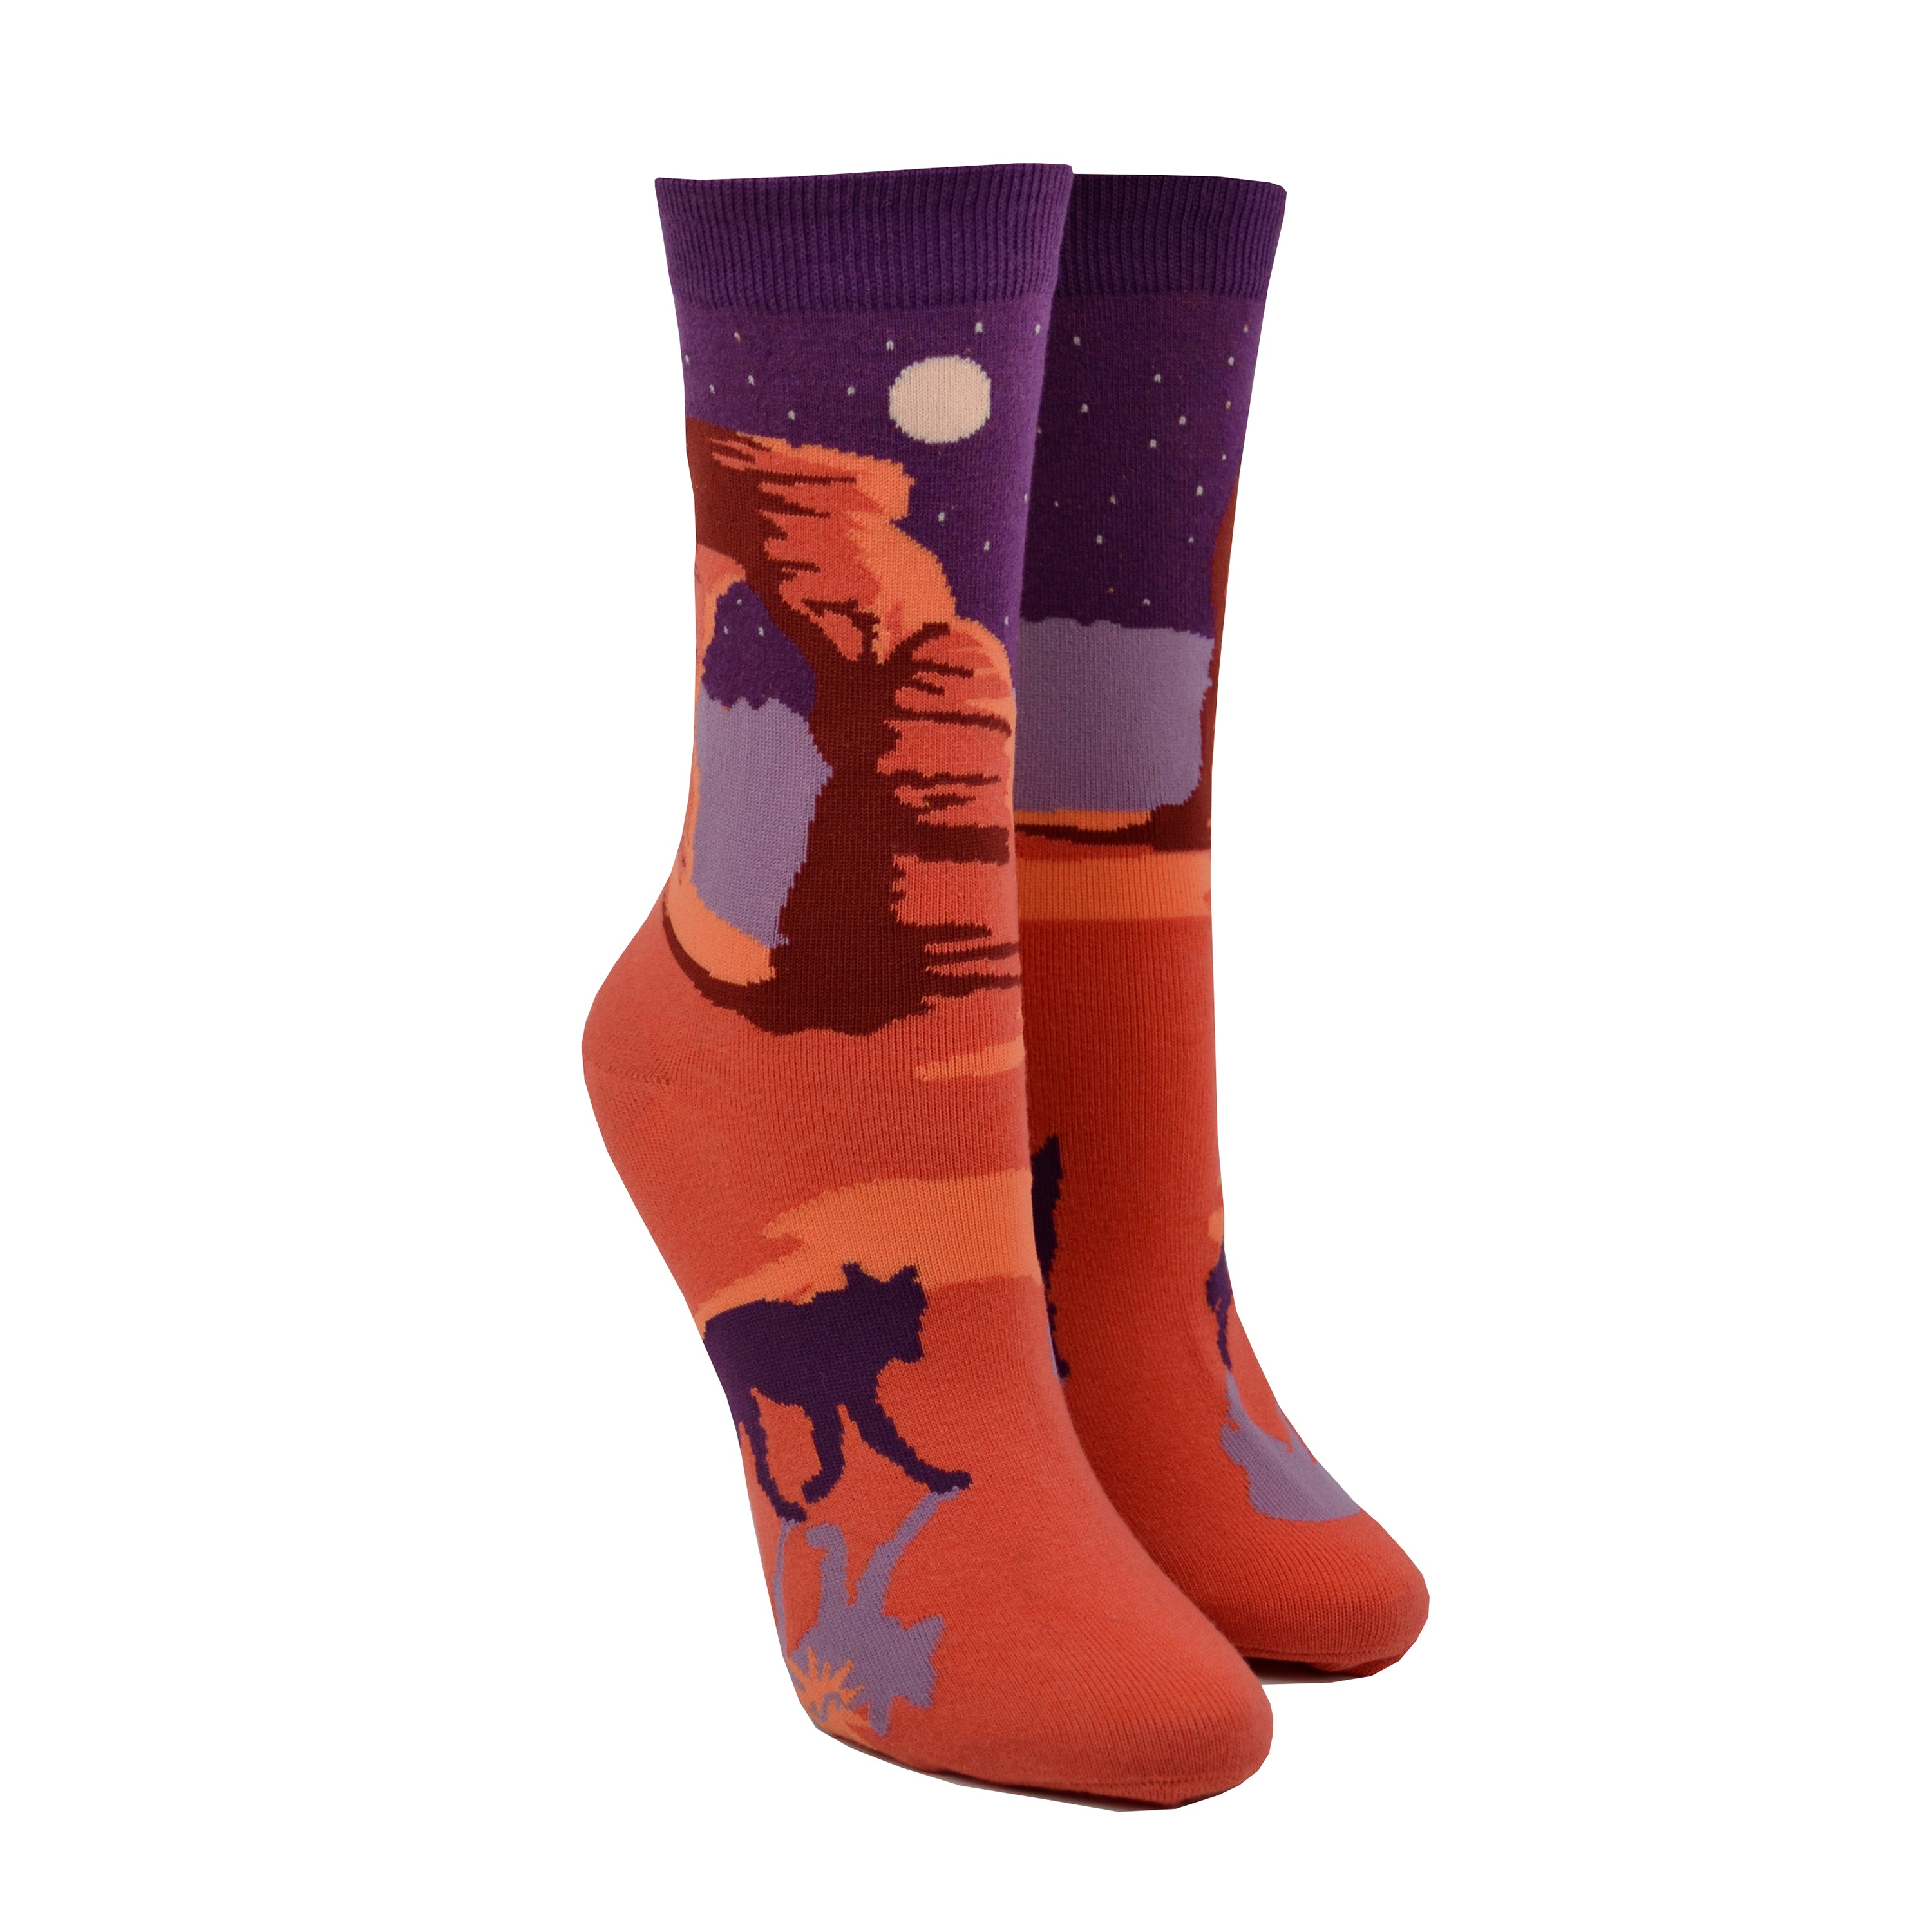 Shown on leg forms, a pair of Sock It to Me brand women's cotton crew socks with an orange heel/toe an a purple cuff. These socks feature an arch from Arches National Park on the leg and a coyote on the foot of the sock as well as the words 